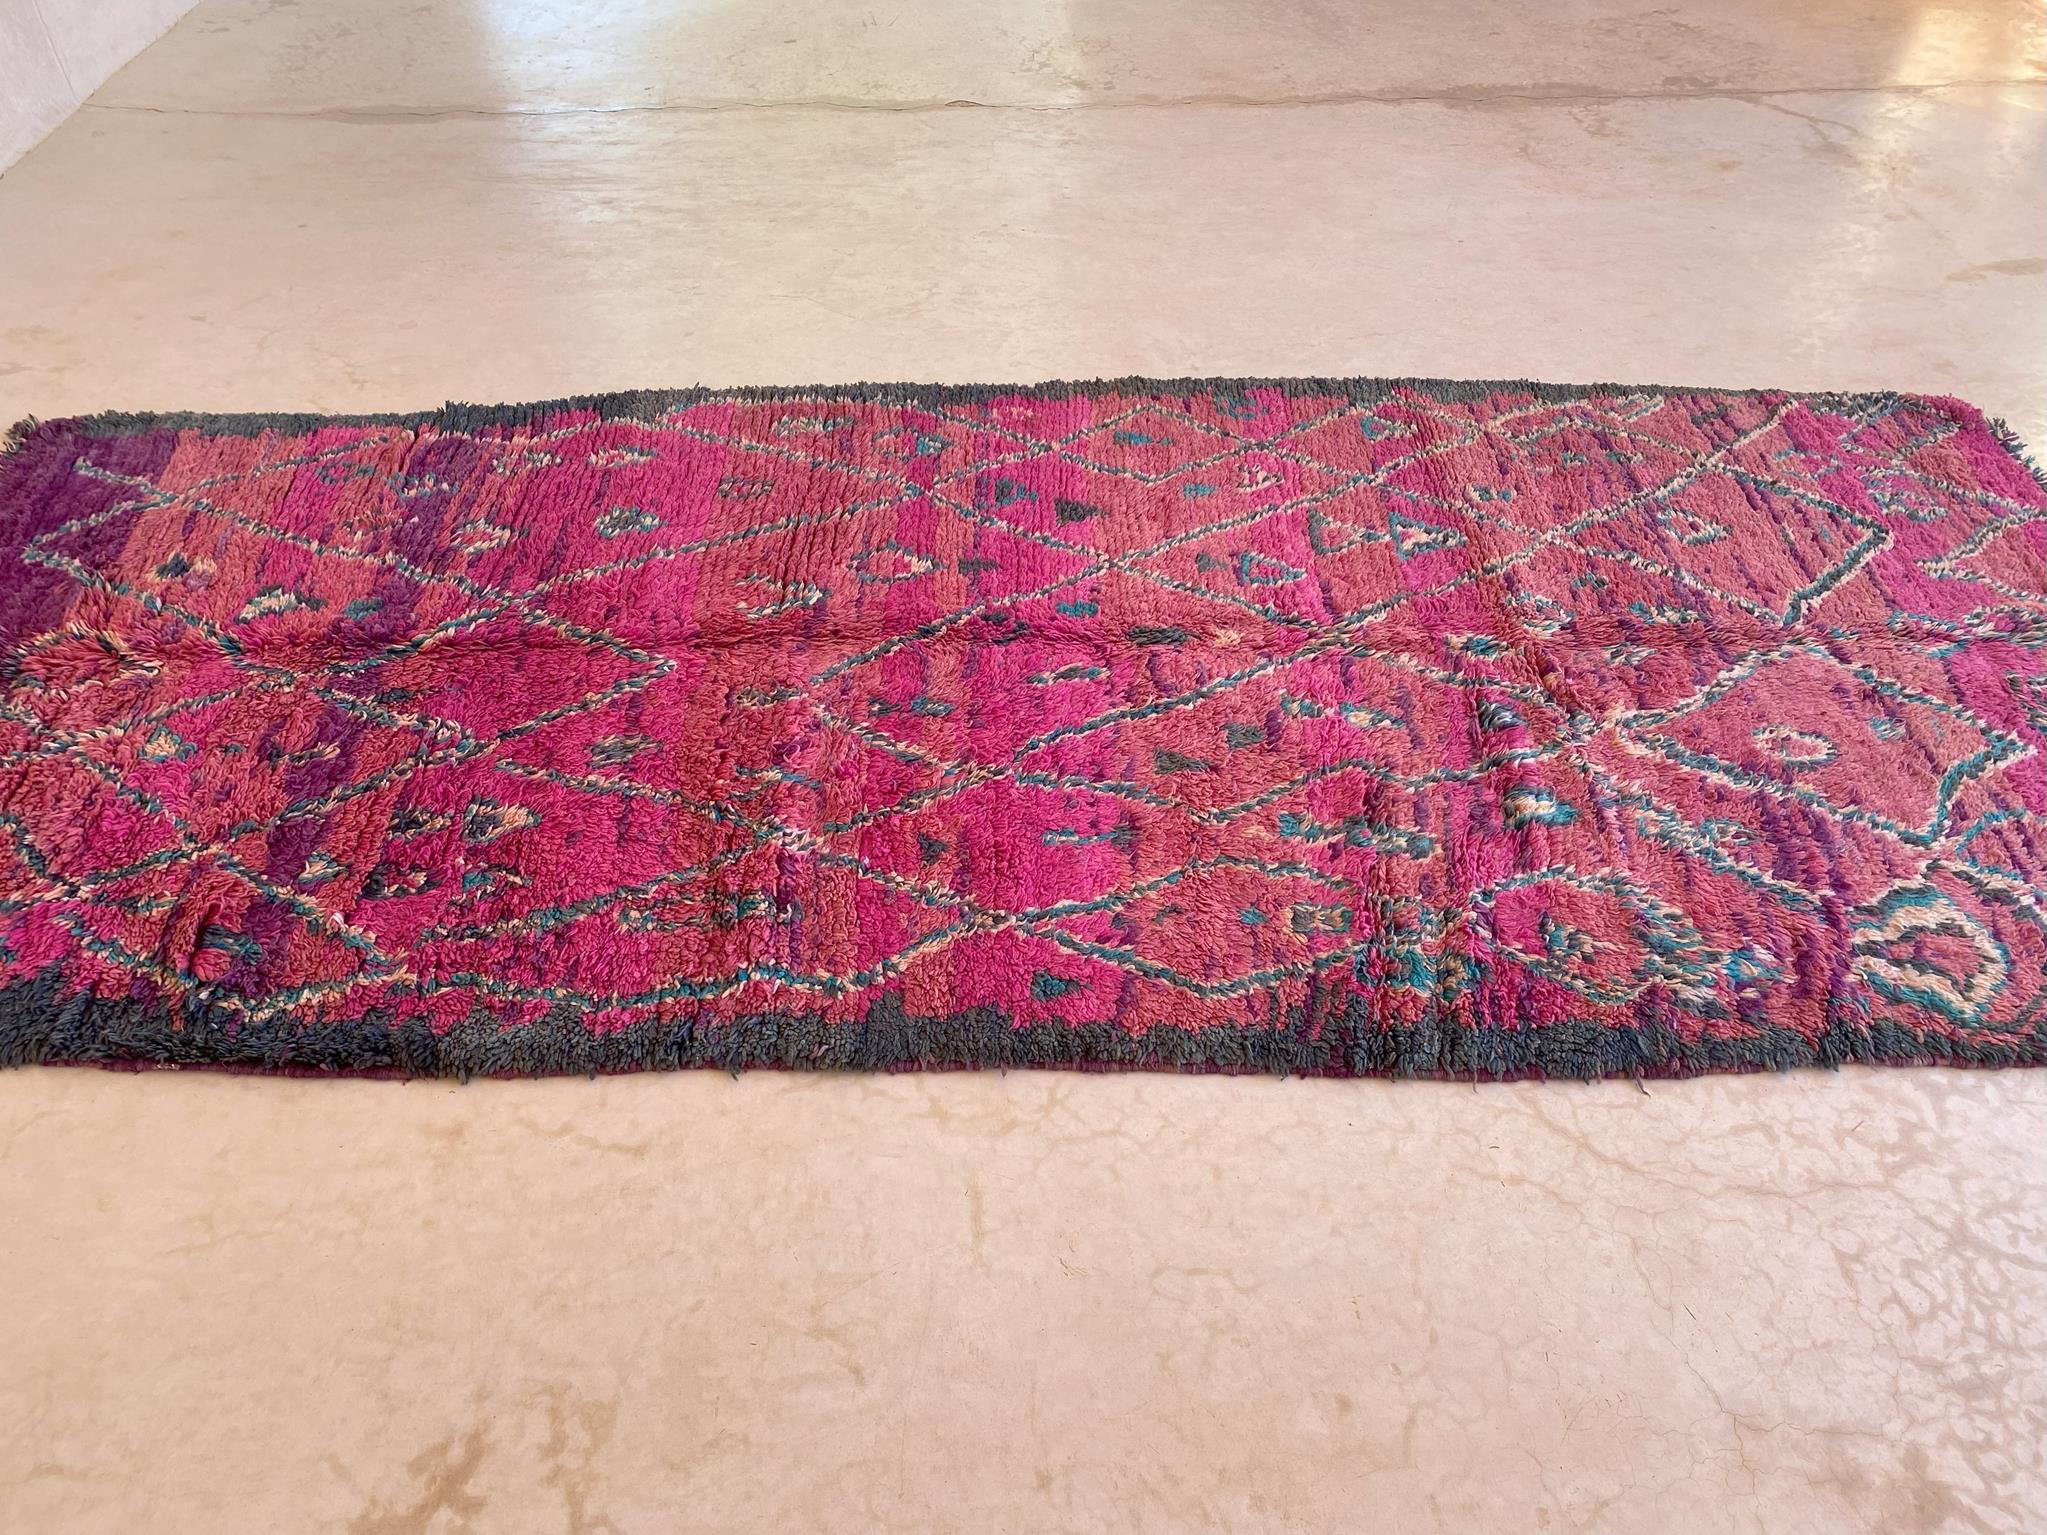 Vintage Moroccan Talsint rug - Fuchsia/purple - 5.4-5.9x13.1feet / 165-180x400cm In Good Condition For Sale In Marrakech, MA